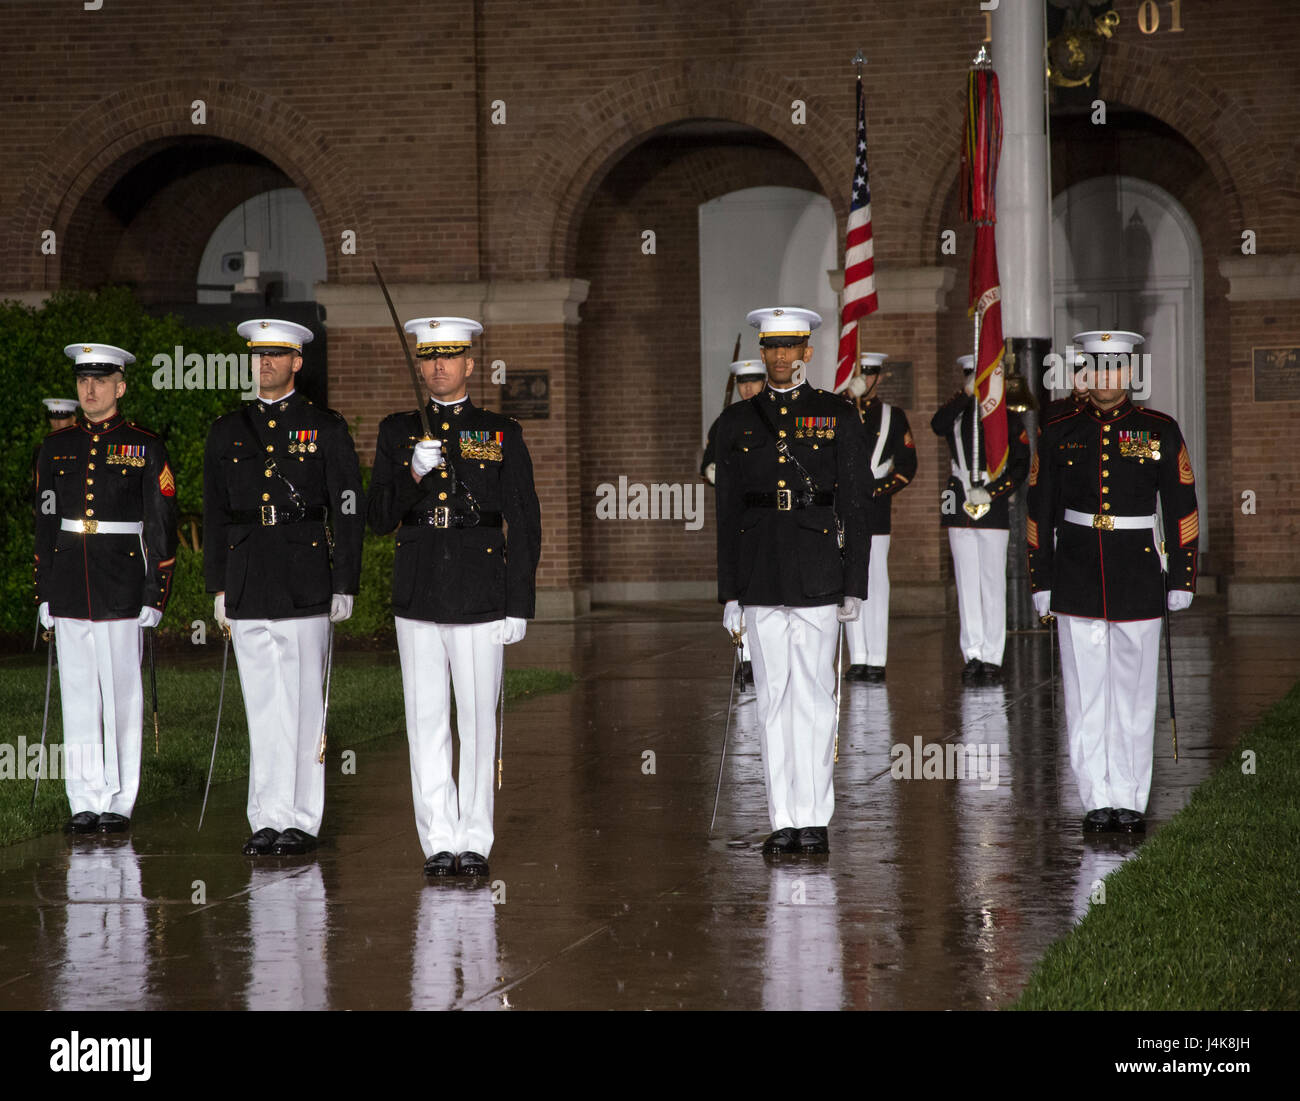 The Parade Staff performs during a Friday Evening Parade at Marine Barracks Washington D.C., May 5, 2017. The guests of honor for the parade were the Honorable Paul Cook, California’s 8th Congressional District Congressman, the Honorable Jack Bergman, Michigan’s 1st Congressional District Congressman, and the Honorable Salud Carbajal, California’s 24th Congressional District Congressman. The hosting official was Gen. Glenn Walters, assistant commandant of the Marine Corps. (Official Marine Corps photo by Cpl. Robert Knapp/Released) Stock Photo